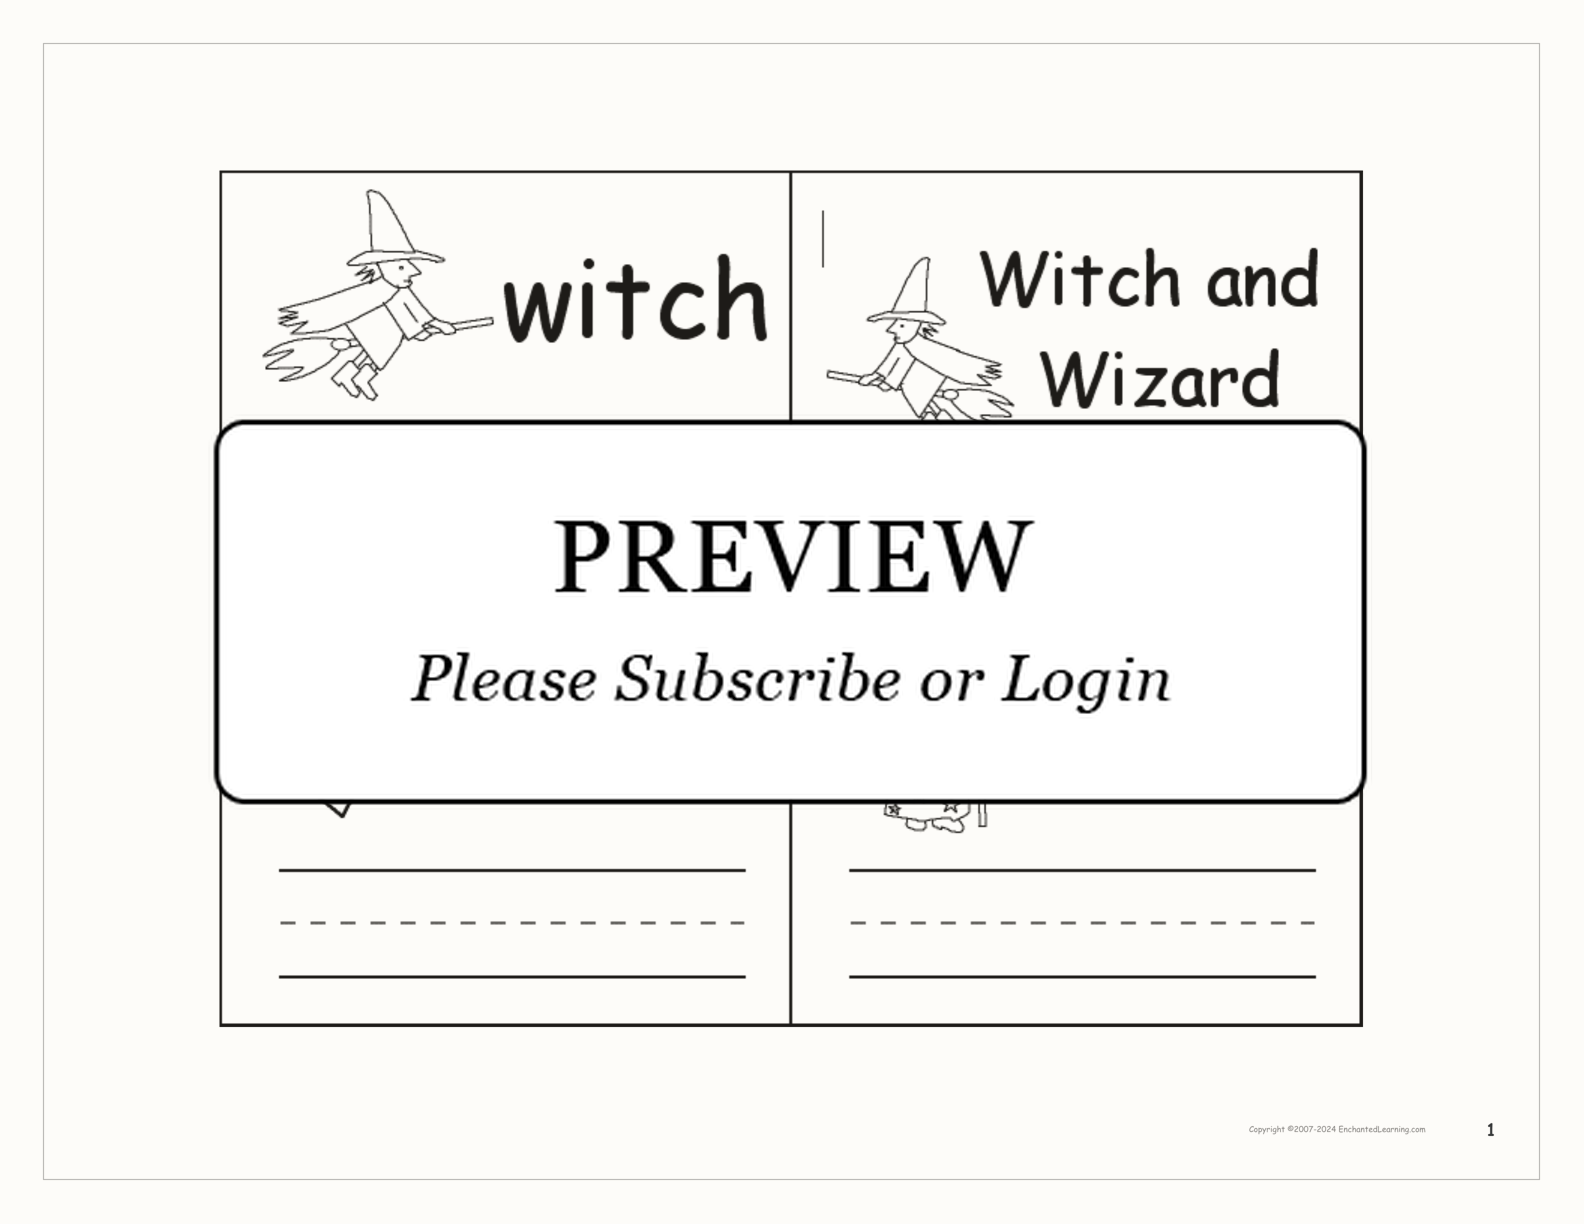 Witch and Wizard Word Book interactive printout page 1